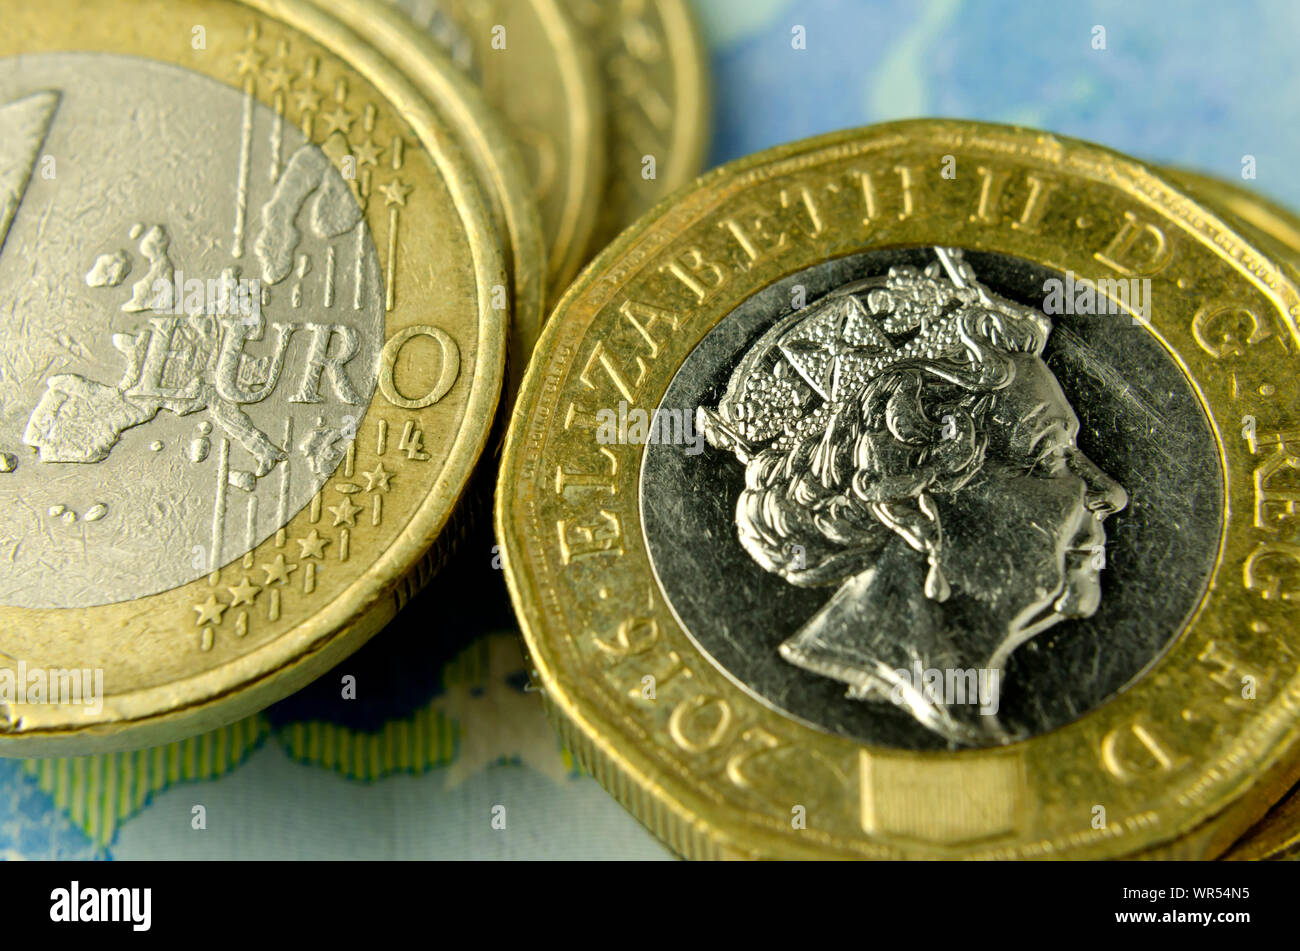 Stack of british pound coins next to one euro coins where visible only the EU map. Illustrates that the UK leaving the EU. Stock Photo